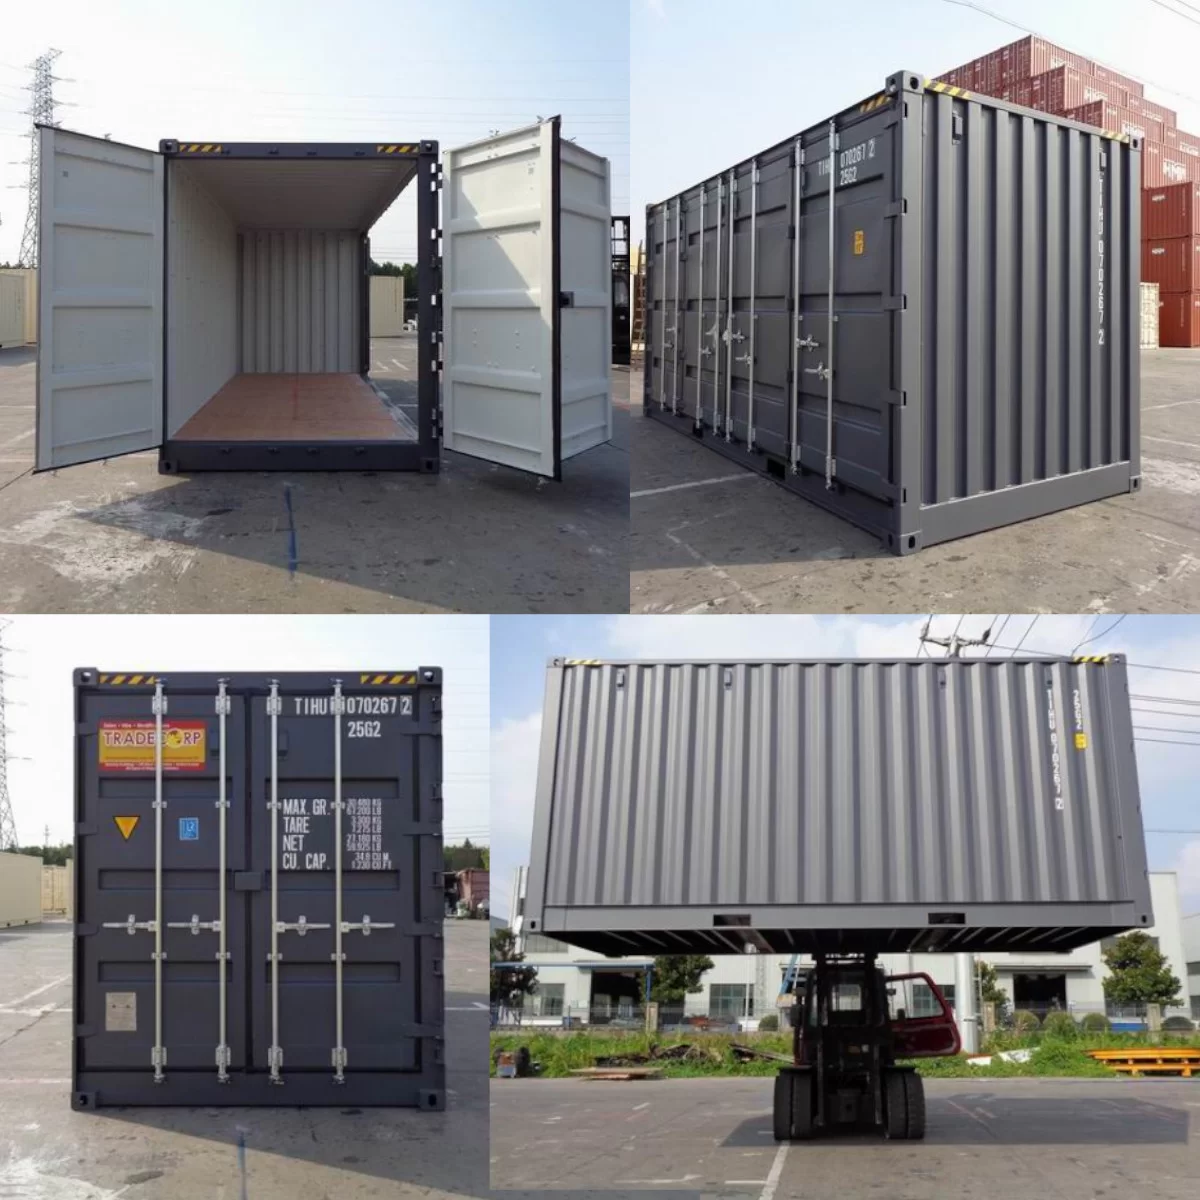 Shipping containers for sale in Kalamazoo